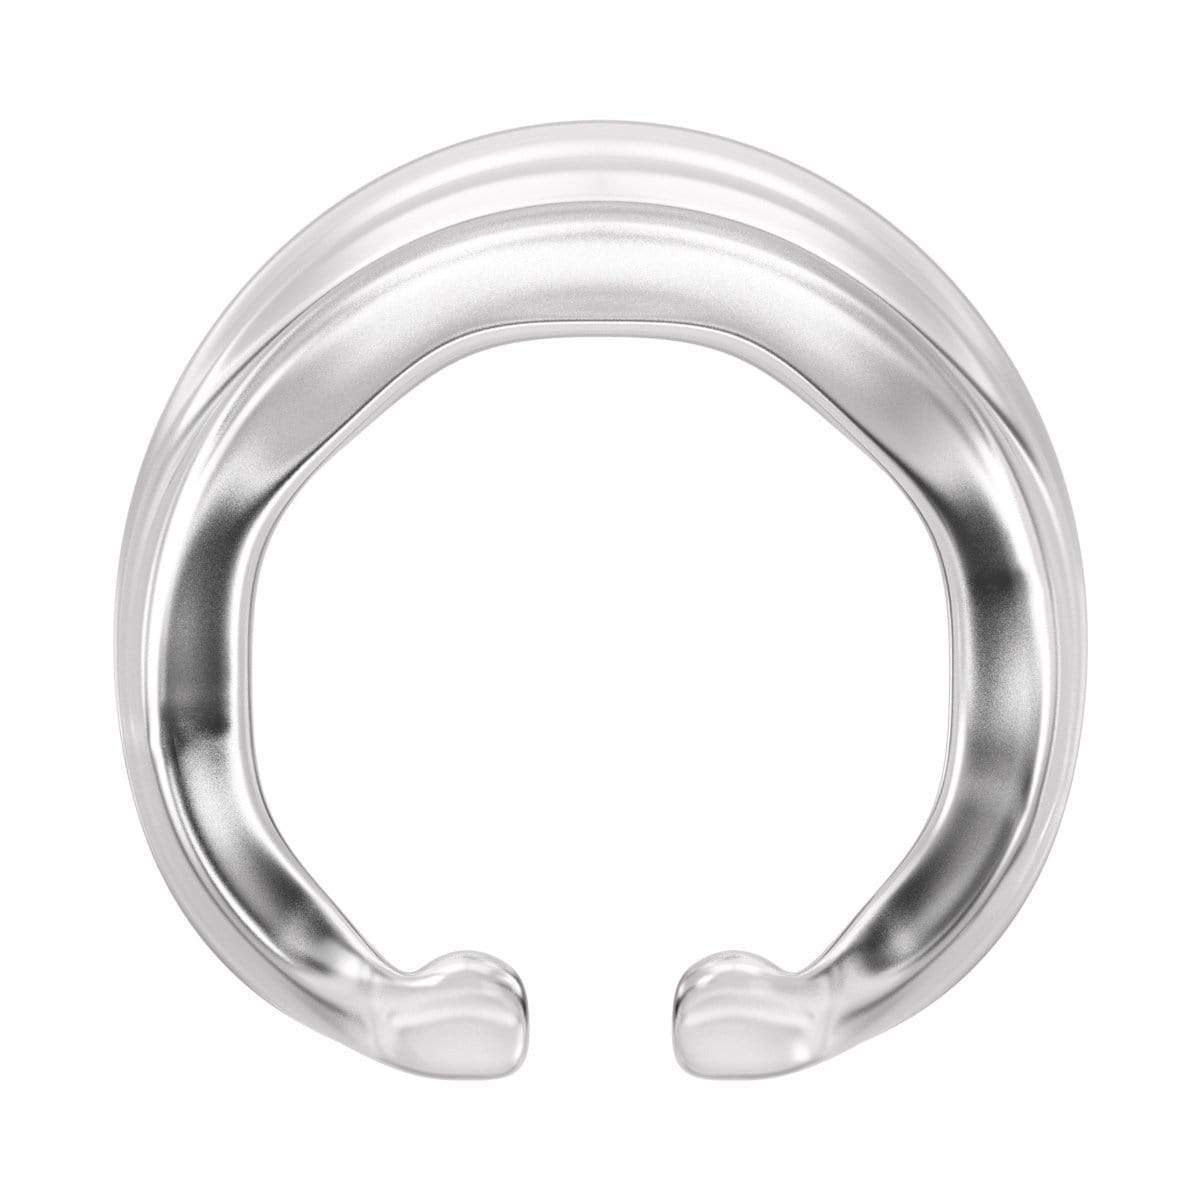 SSI Japan - My Peace Wide Standard Day Size L Correction Cock Ring (Clear) -  Cock Ring (Non Vibration)  Durio.sg